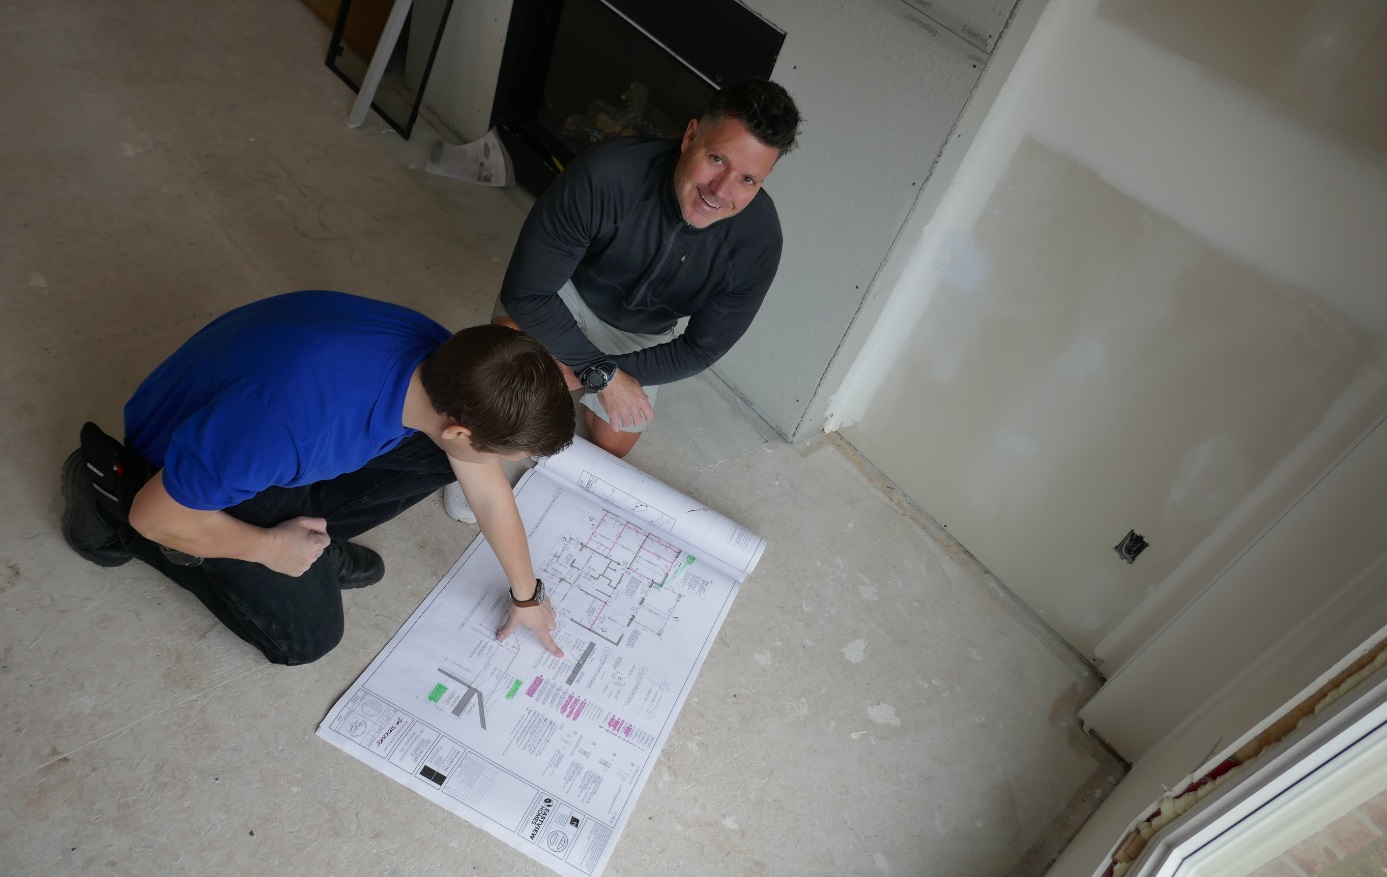 inspecting the plans for a home in Oakville